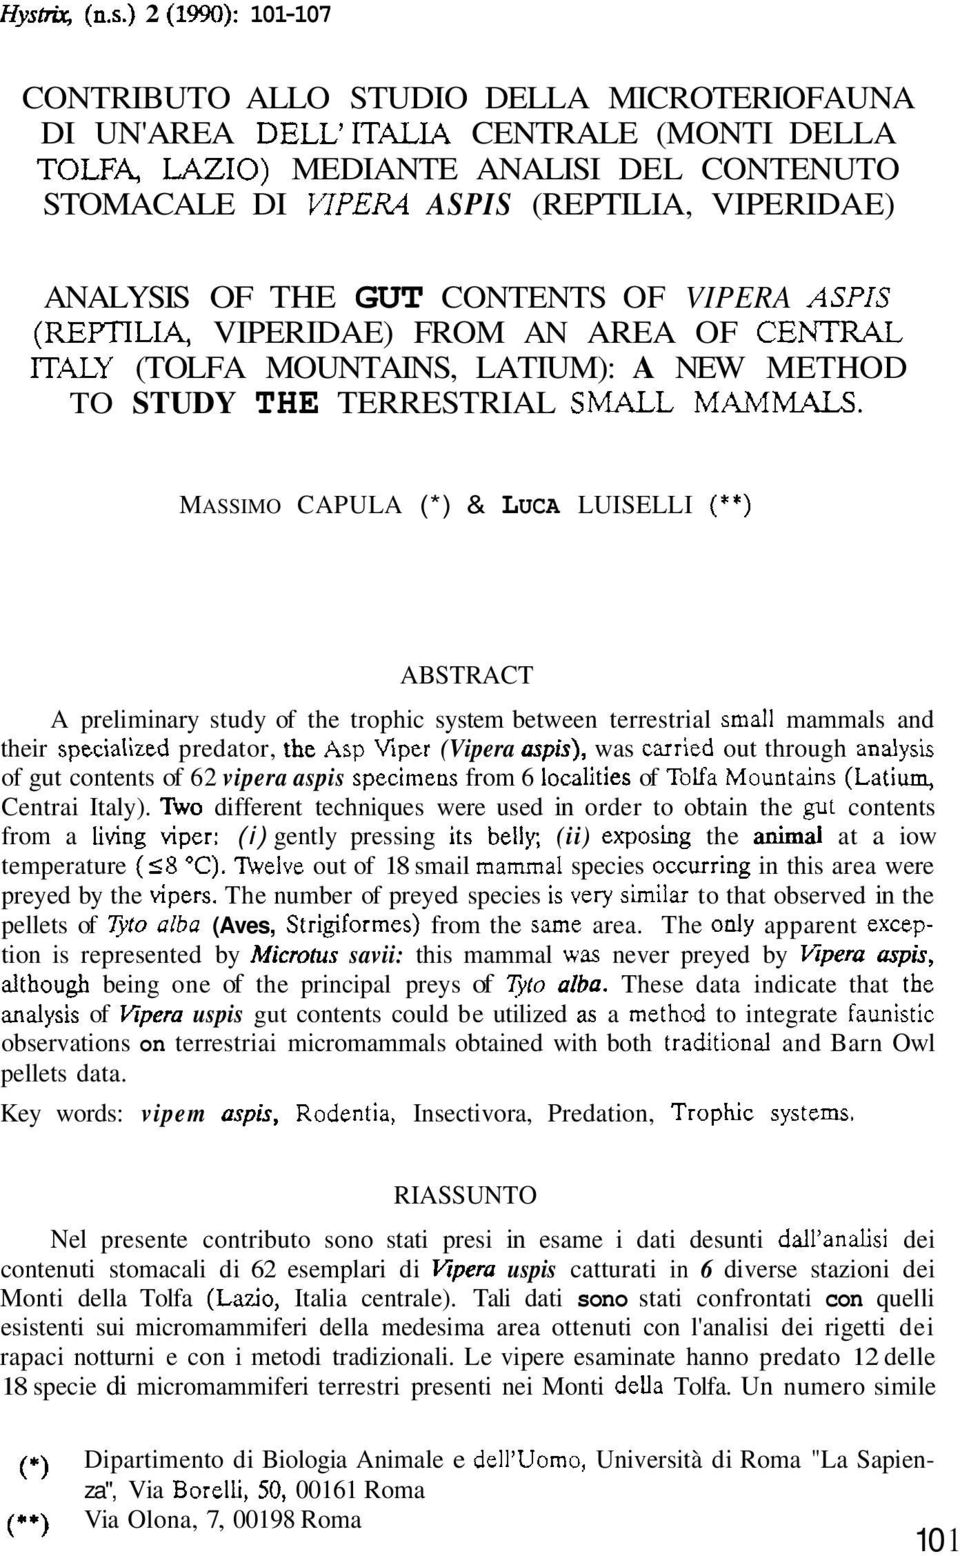 MASSIMO CAPULA (*) & LUCA LUISELLI (**) ABSTRACT A preliminary study of the trophic system between terrestrial smali mammals and their specialized predator, the Asp Viper (Vipera aspis), was carried